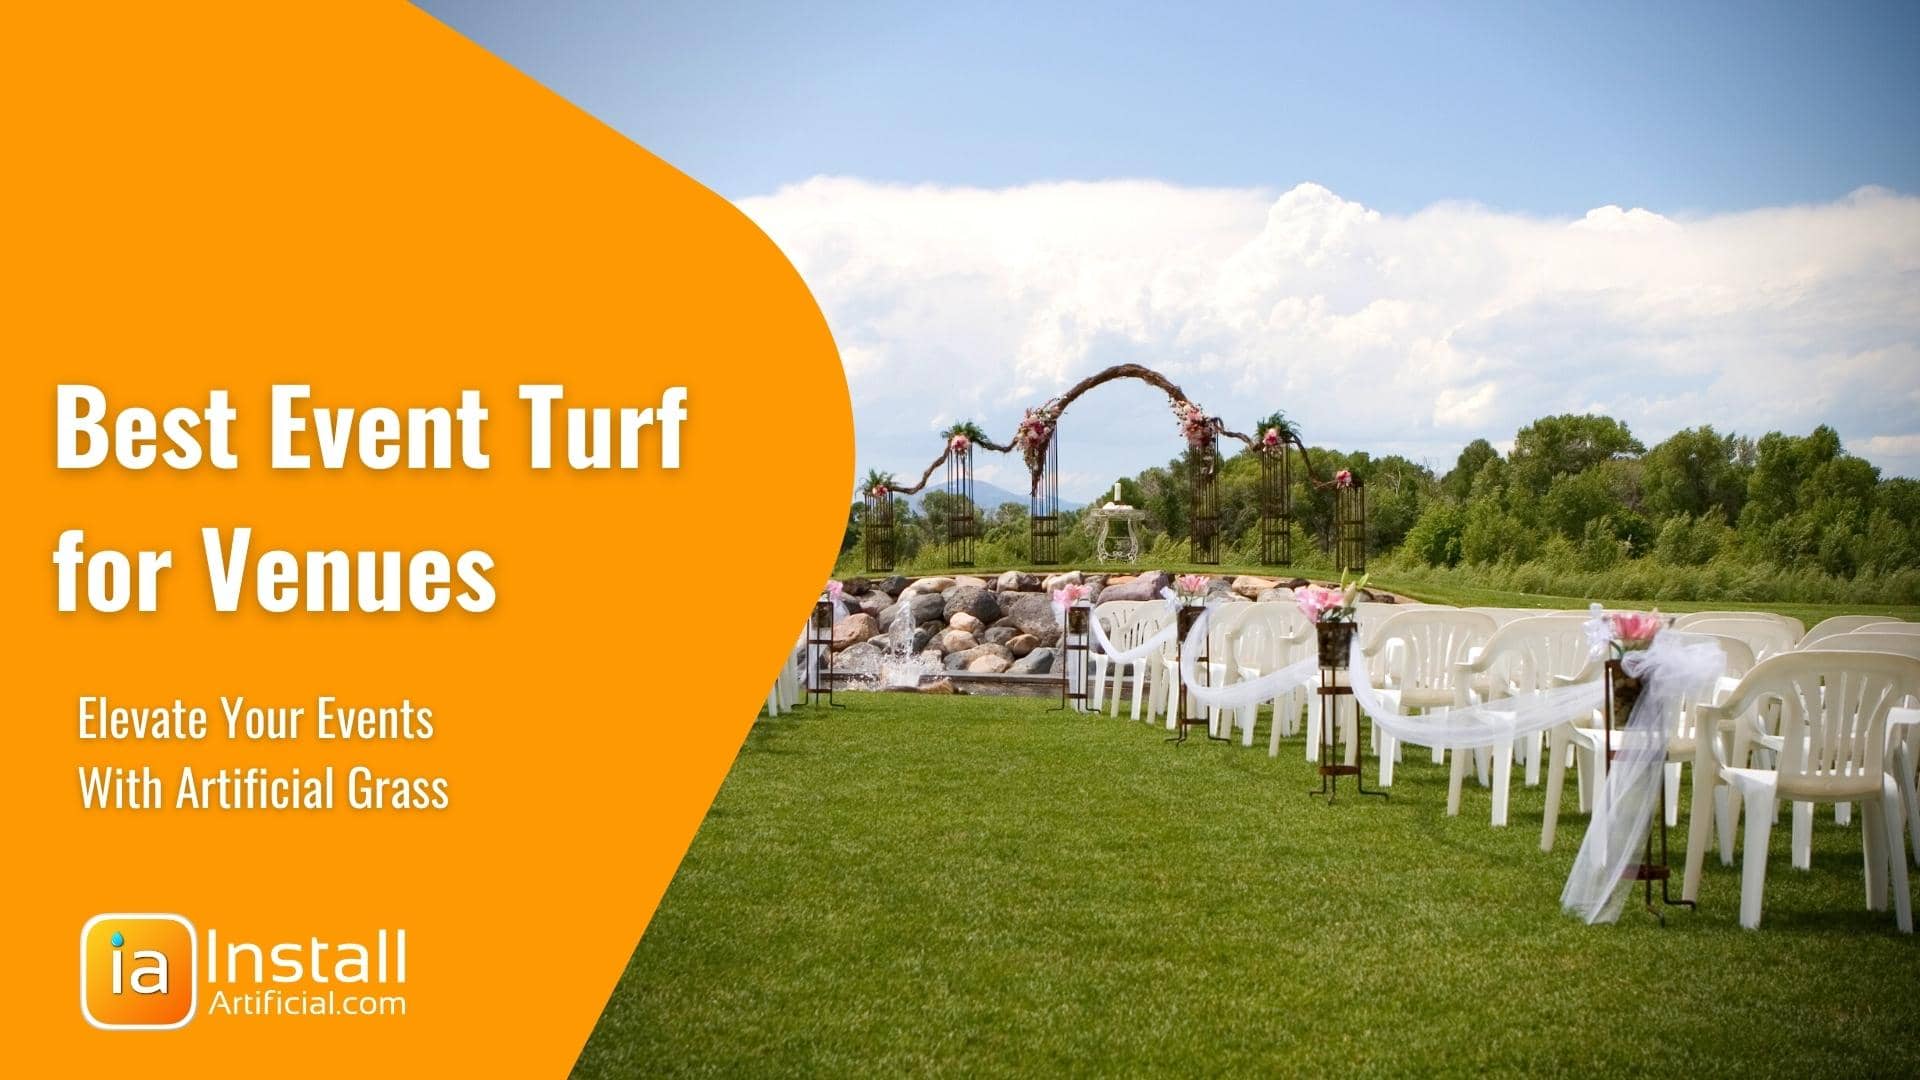 Best Event Turf for Venues